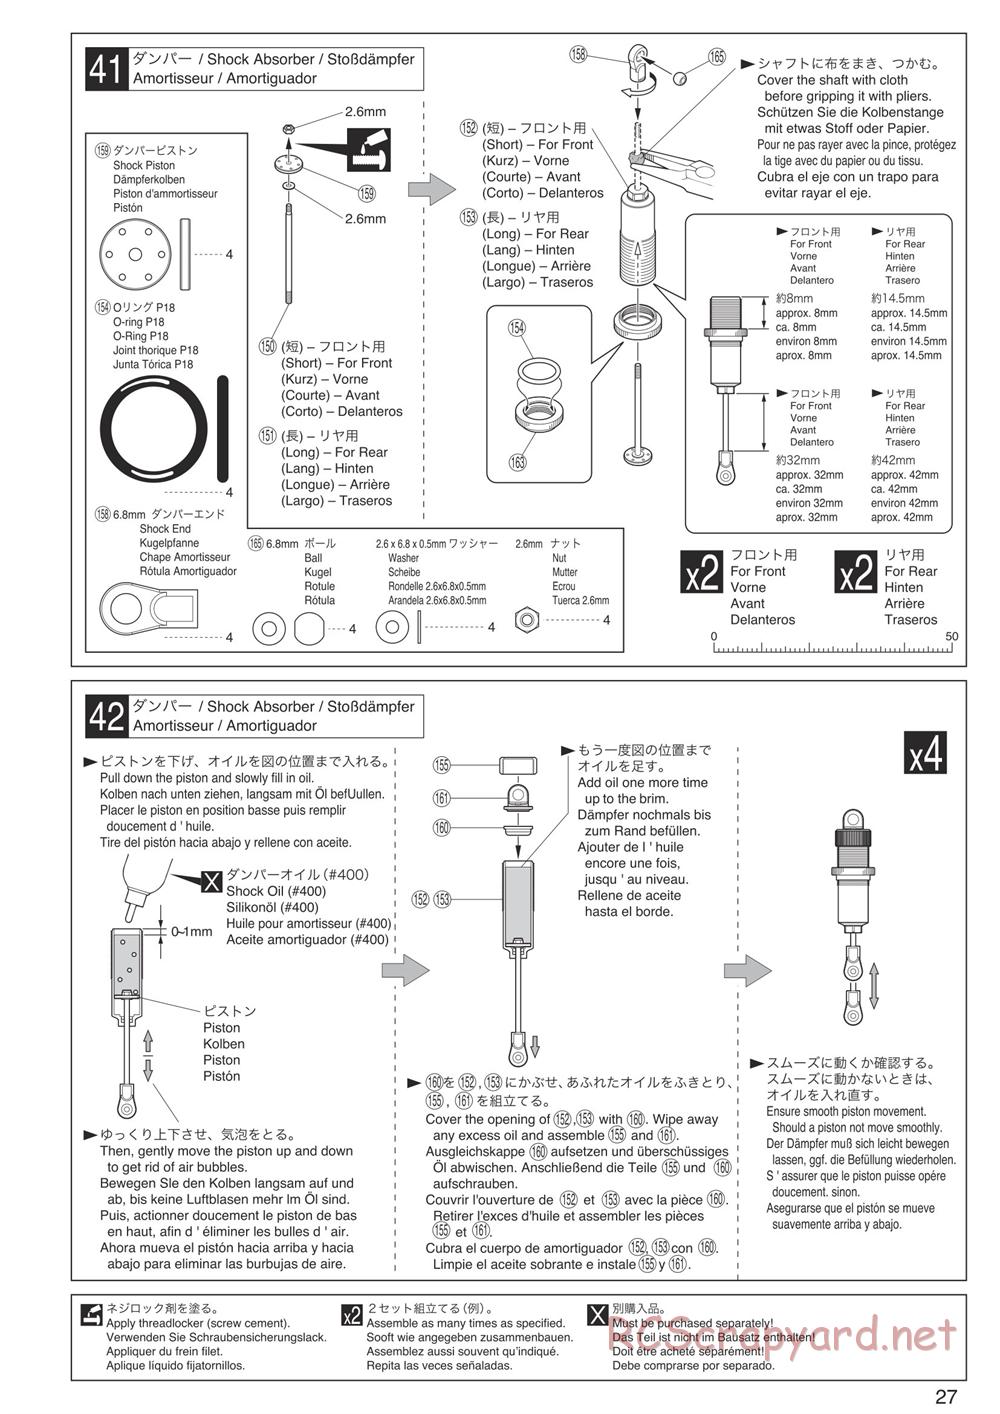 Kyosho - Inferno Neo Race Spec - Manual - Page 27